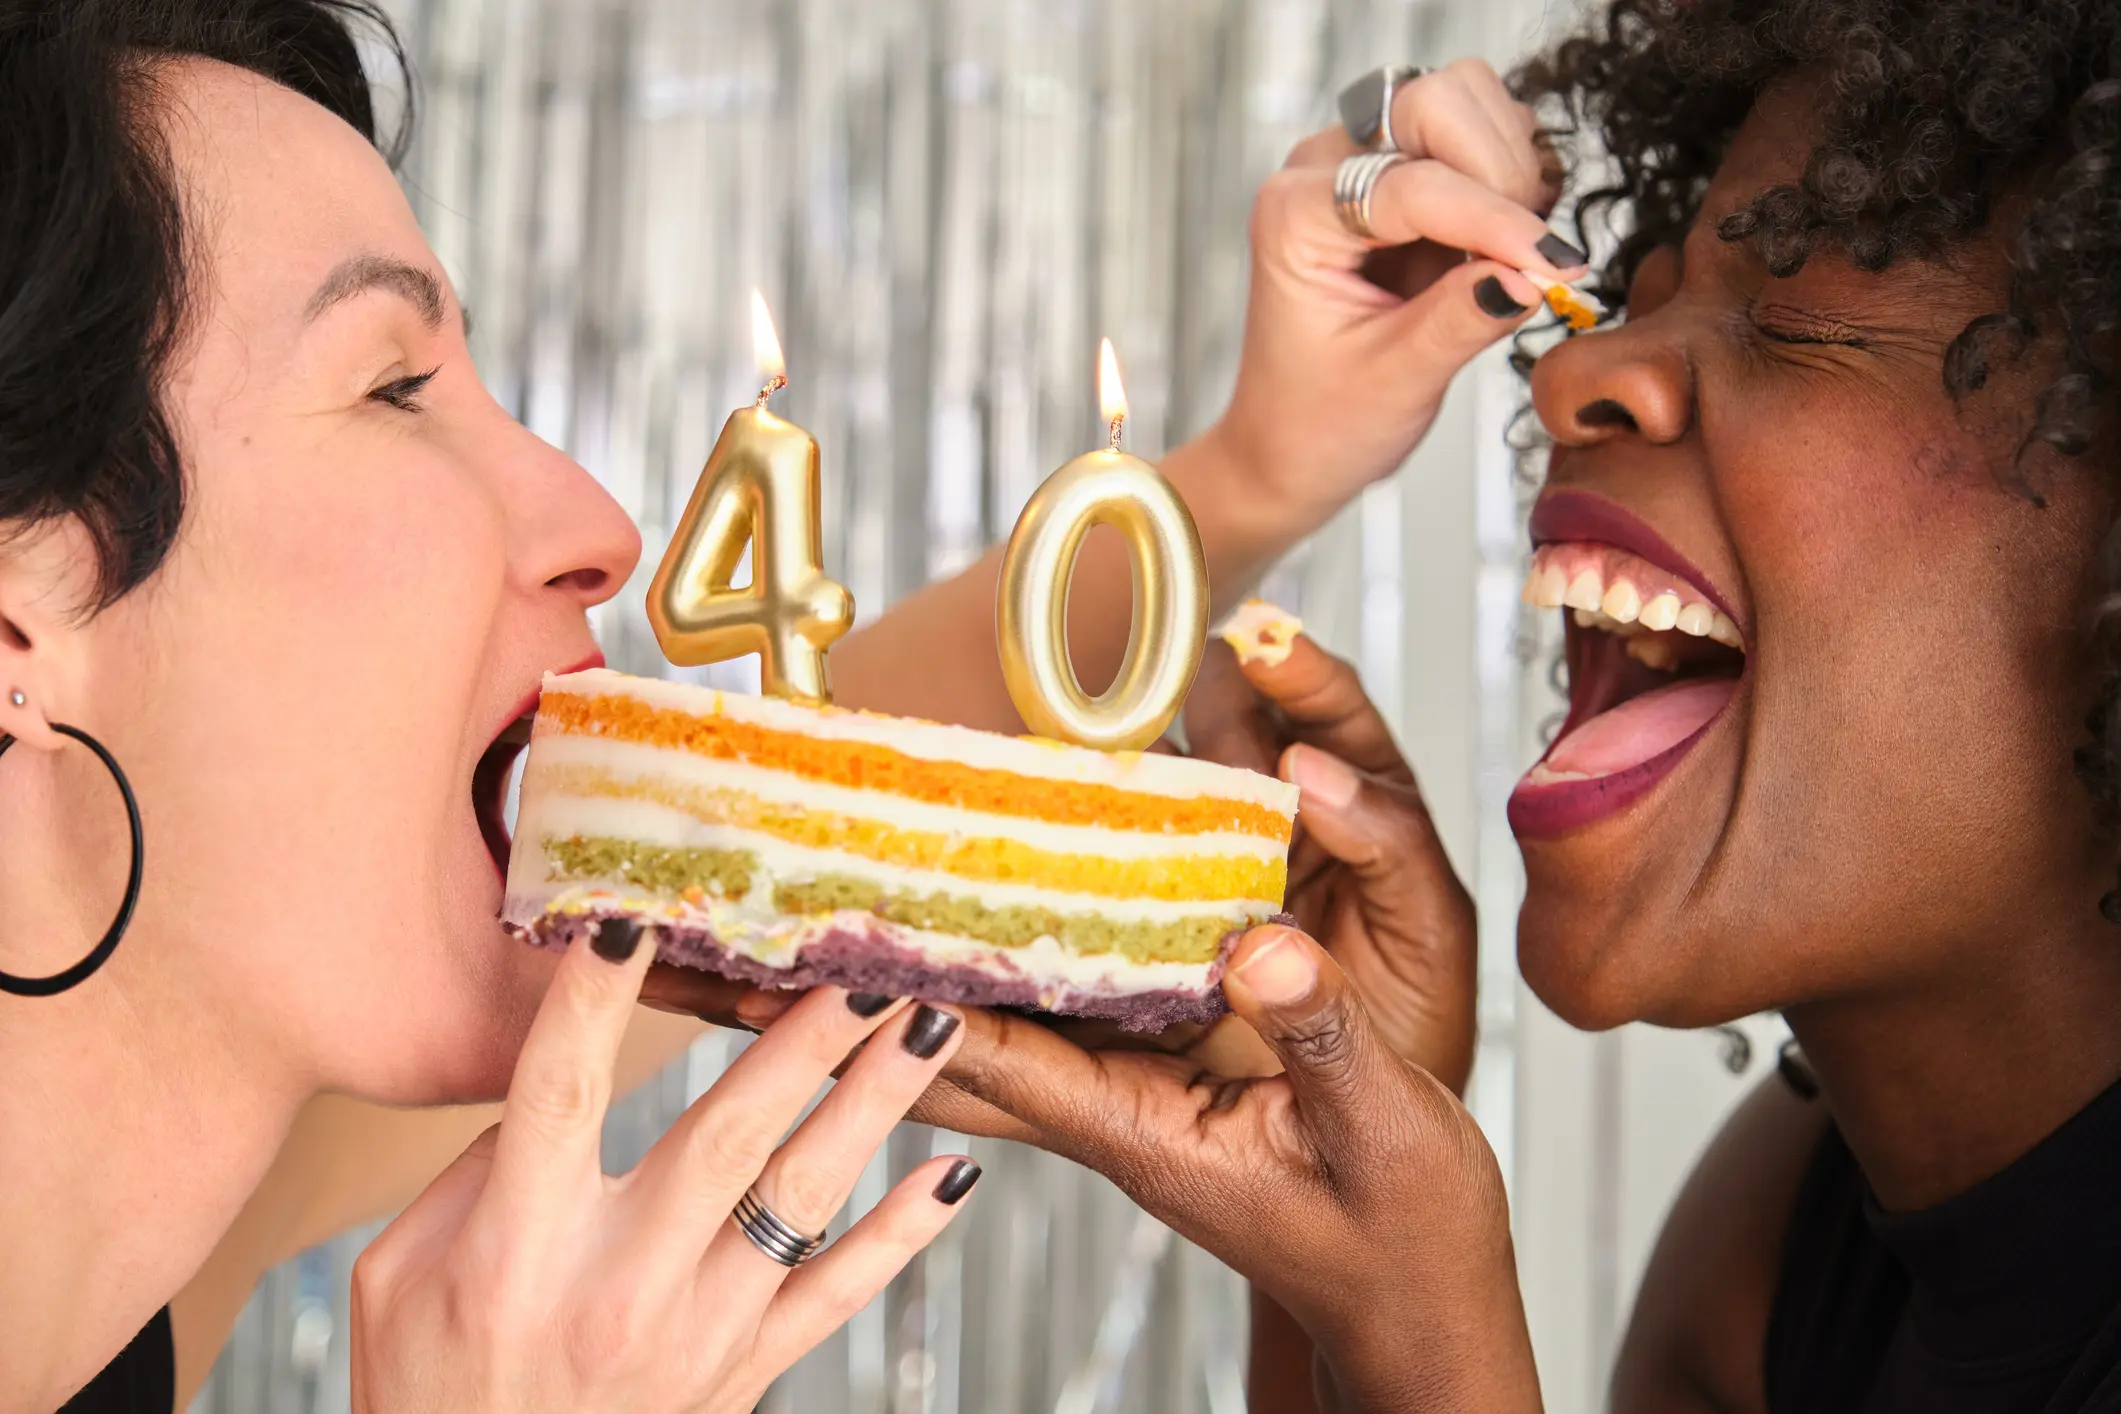 Two women holding a cake with lit 4 and 0 candles between them. The one with the cake in her mouth is tryng to put cake on the other's nose